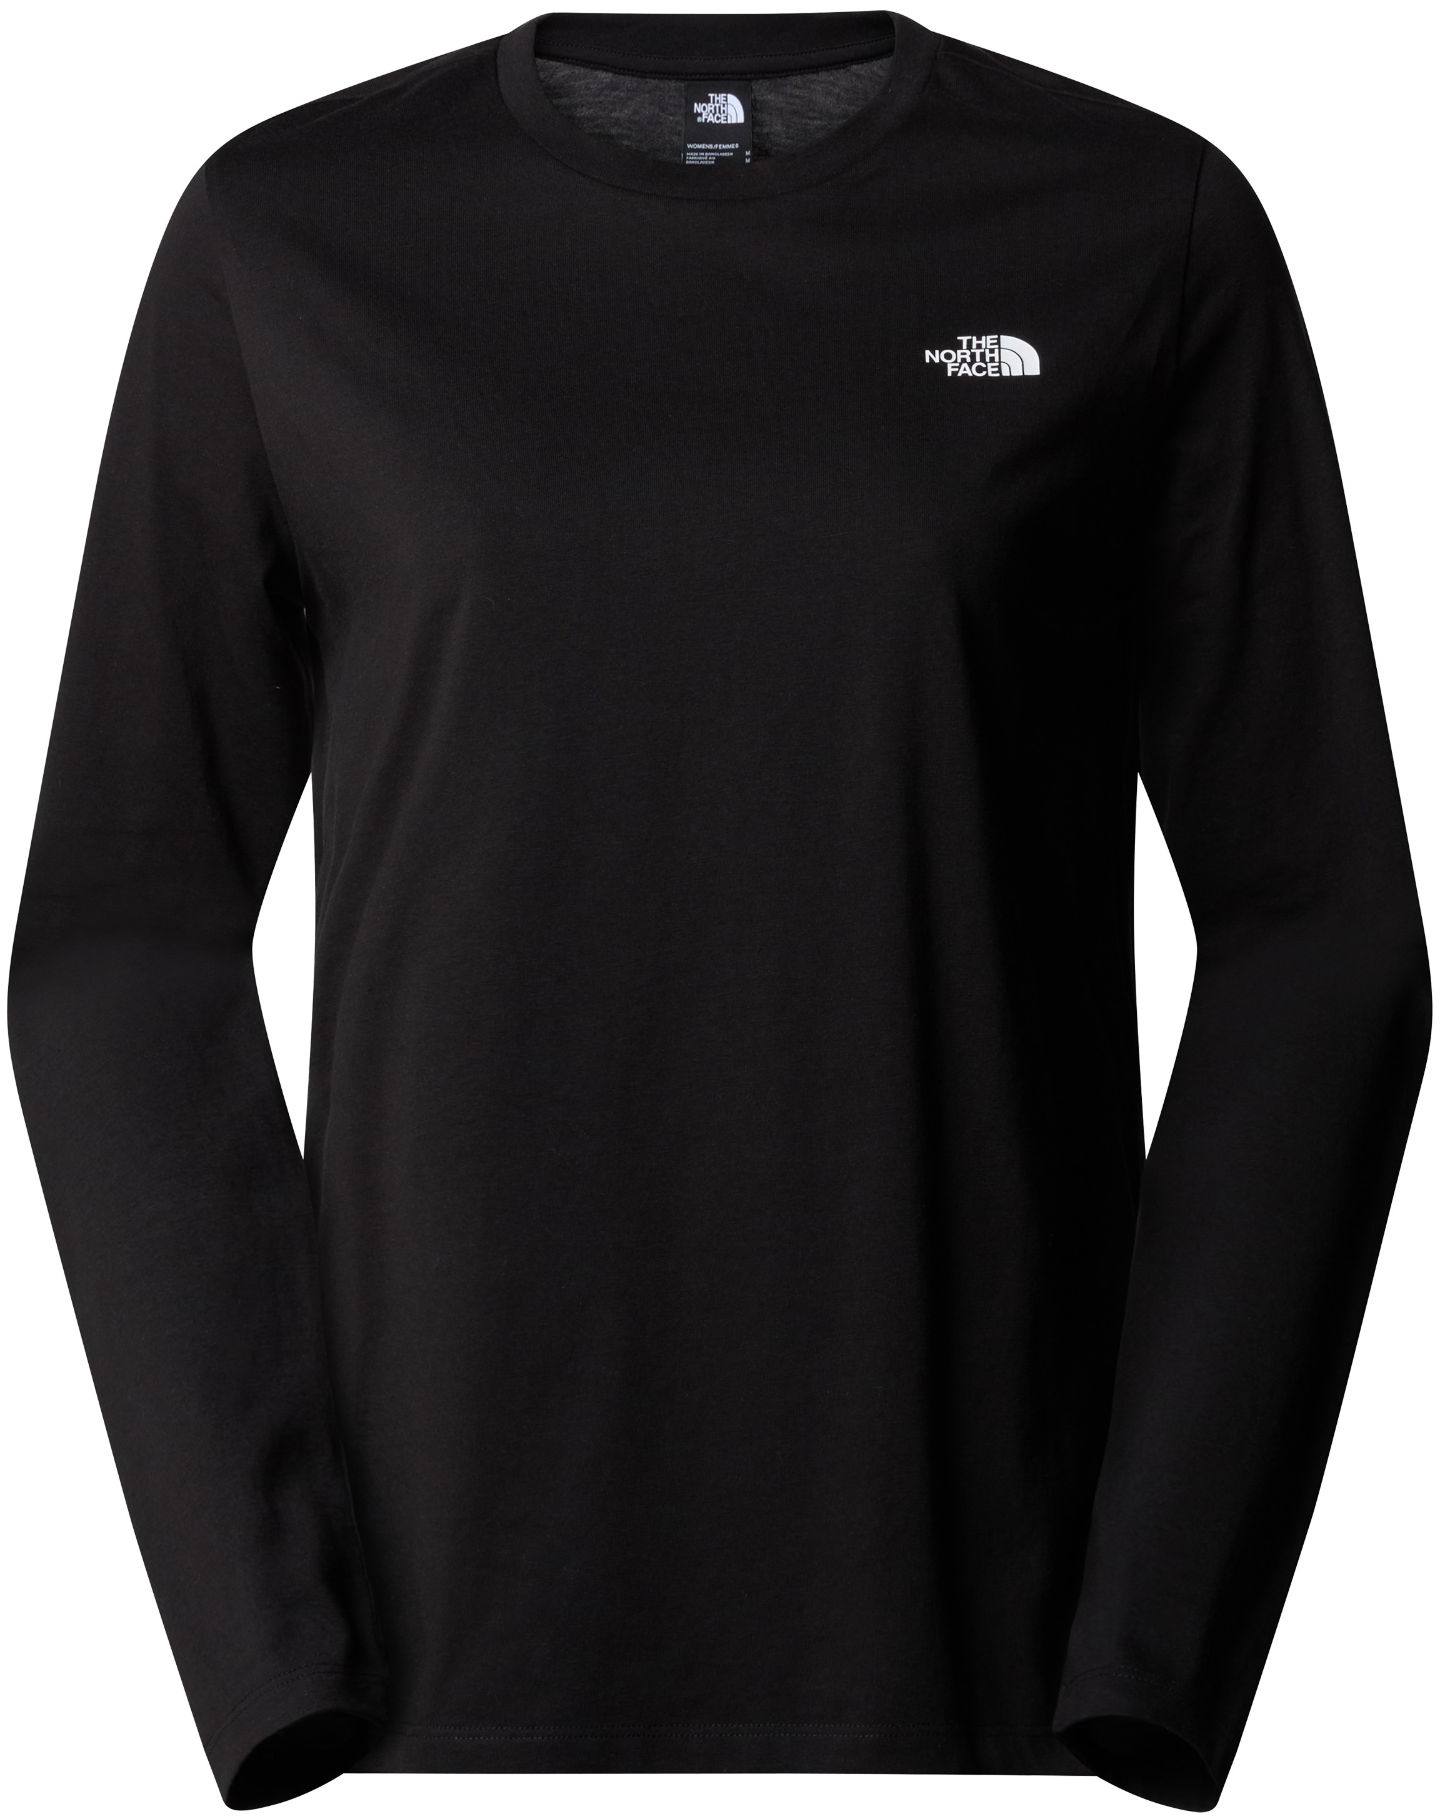 The North Face Women’s Simple Dome Long Sleeve